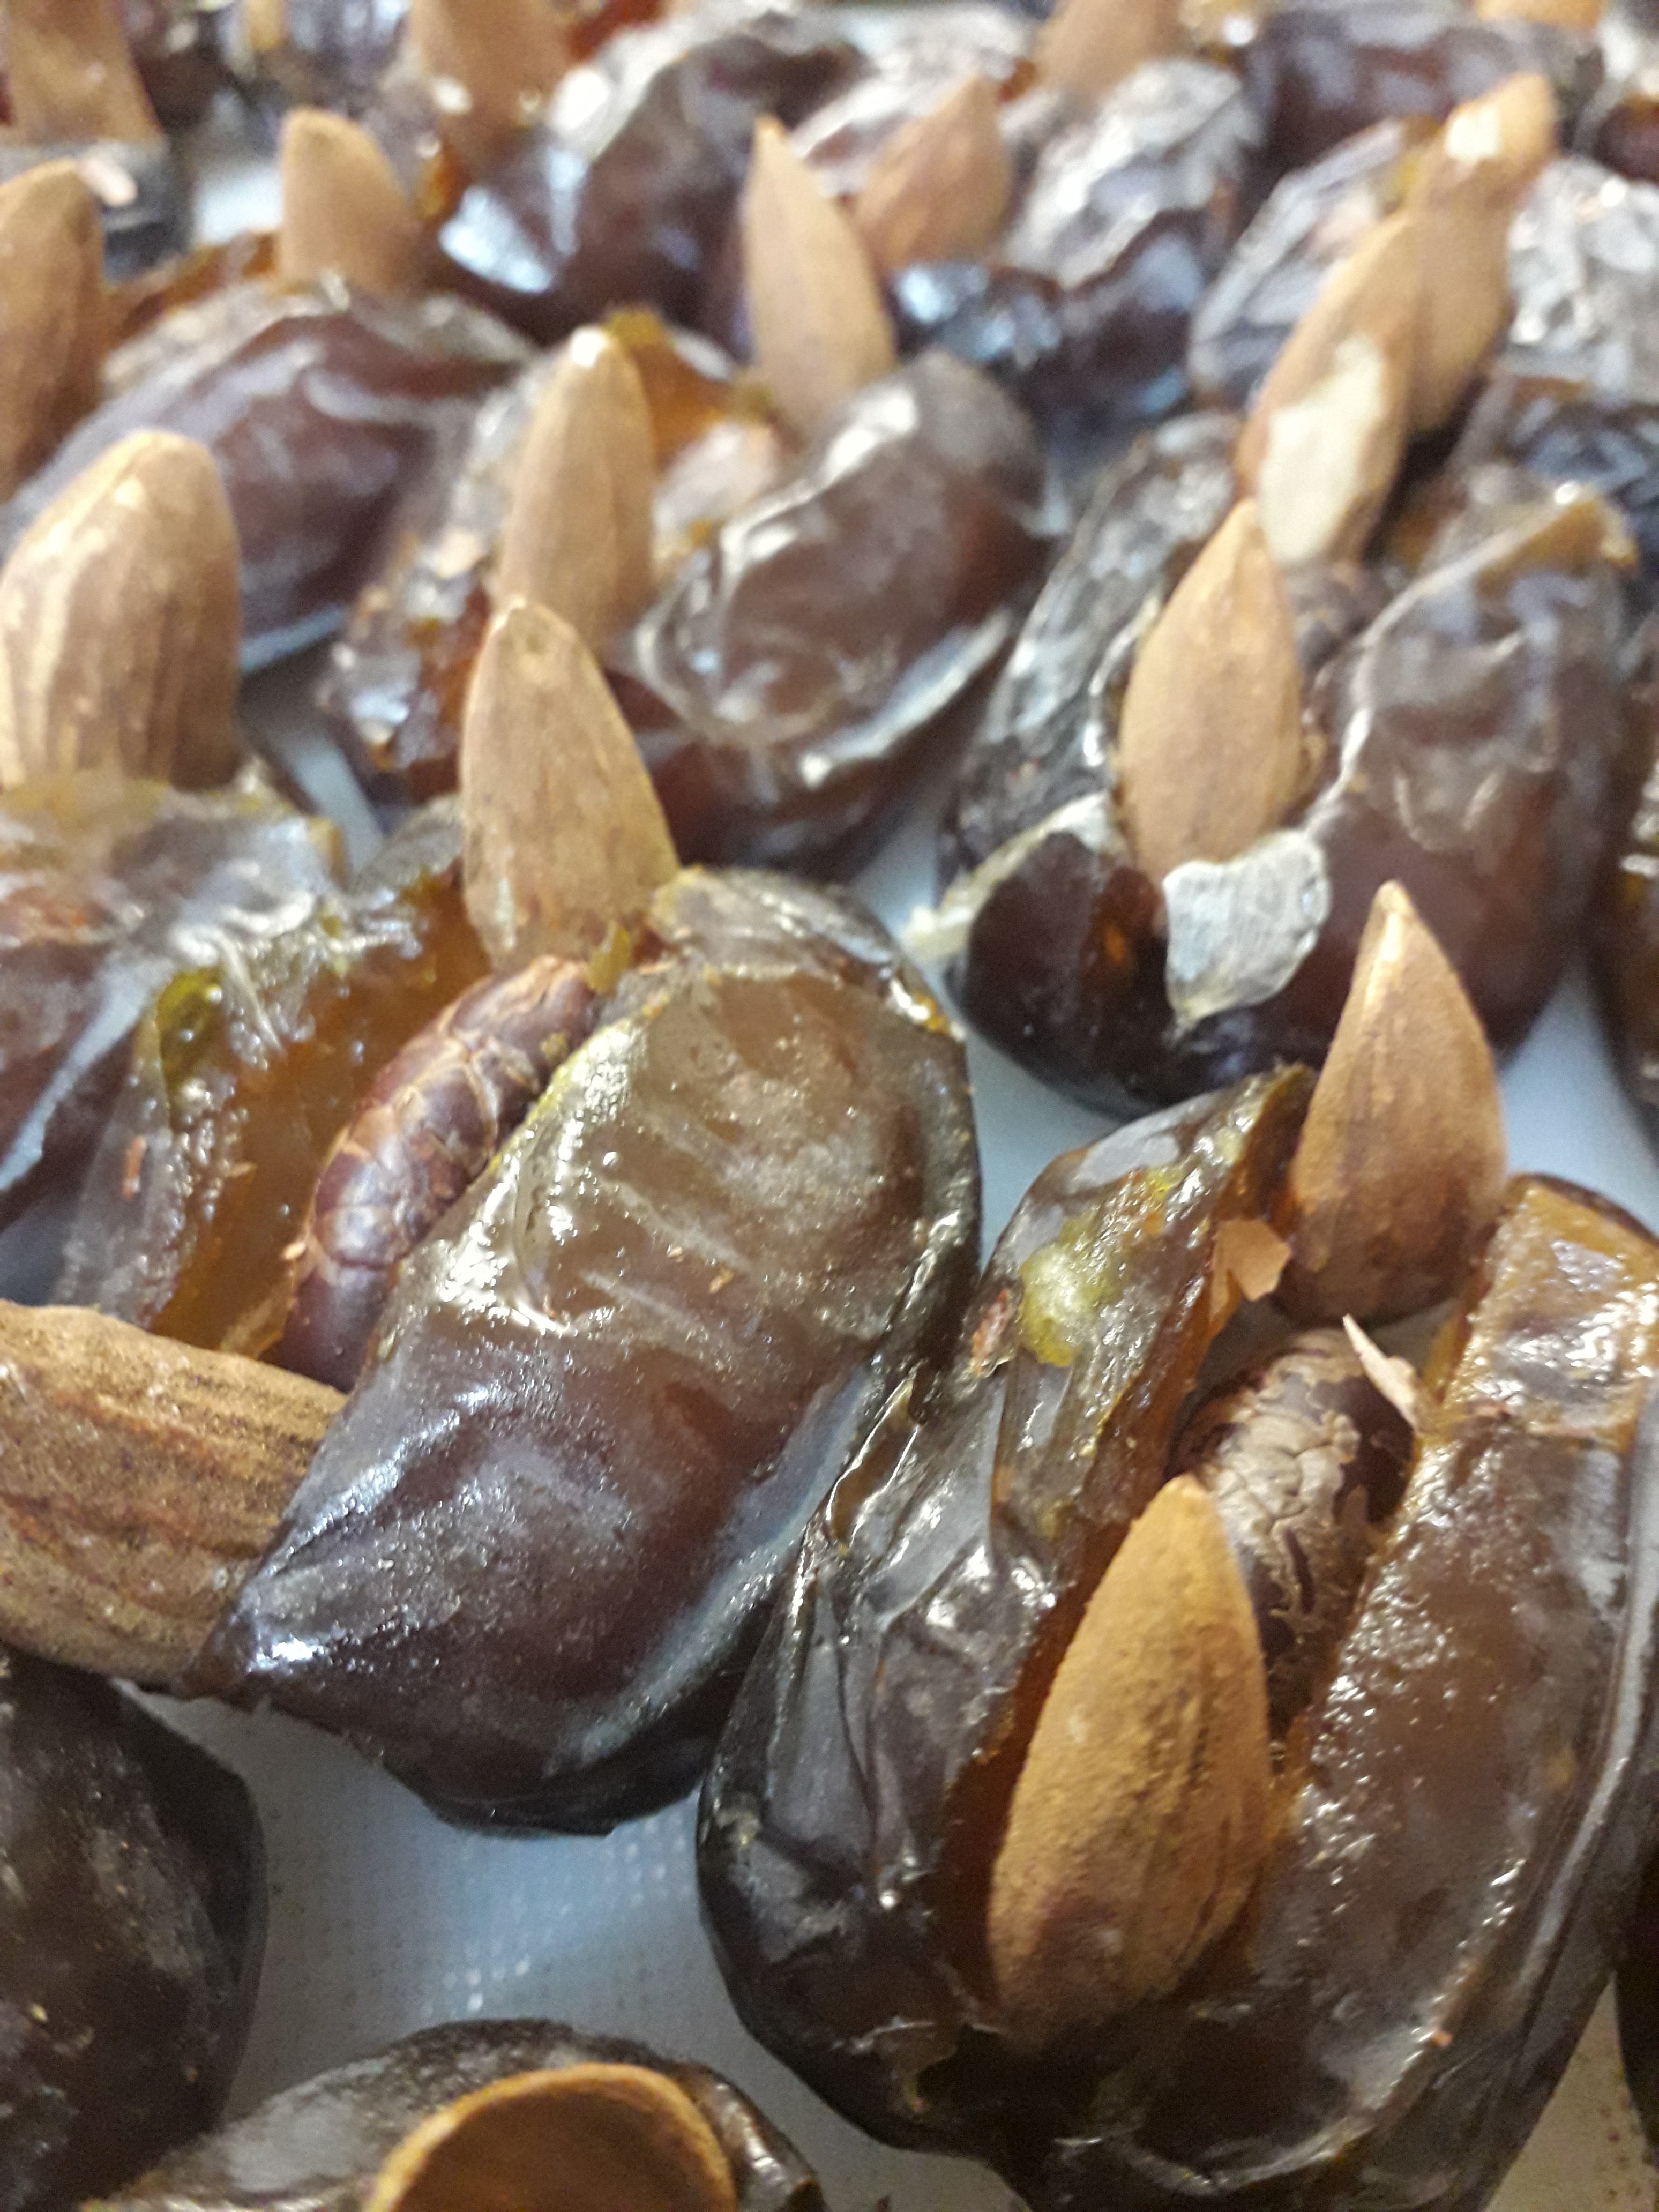 Stegos : Medjool Dates with Cocoa Bean and Almonds (vegan)